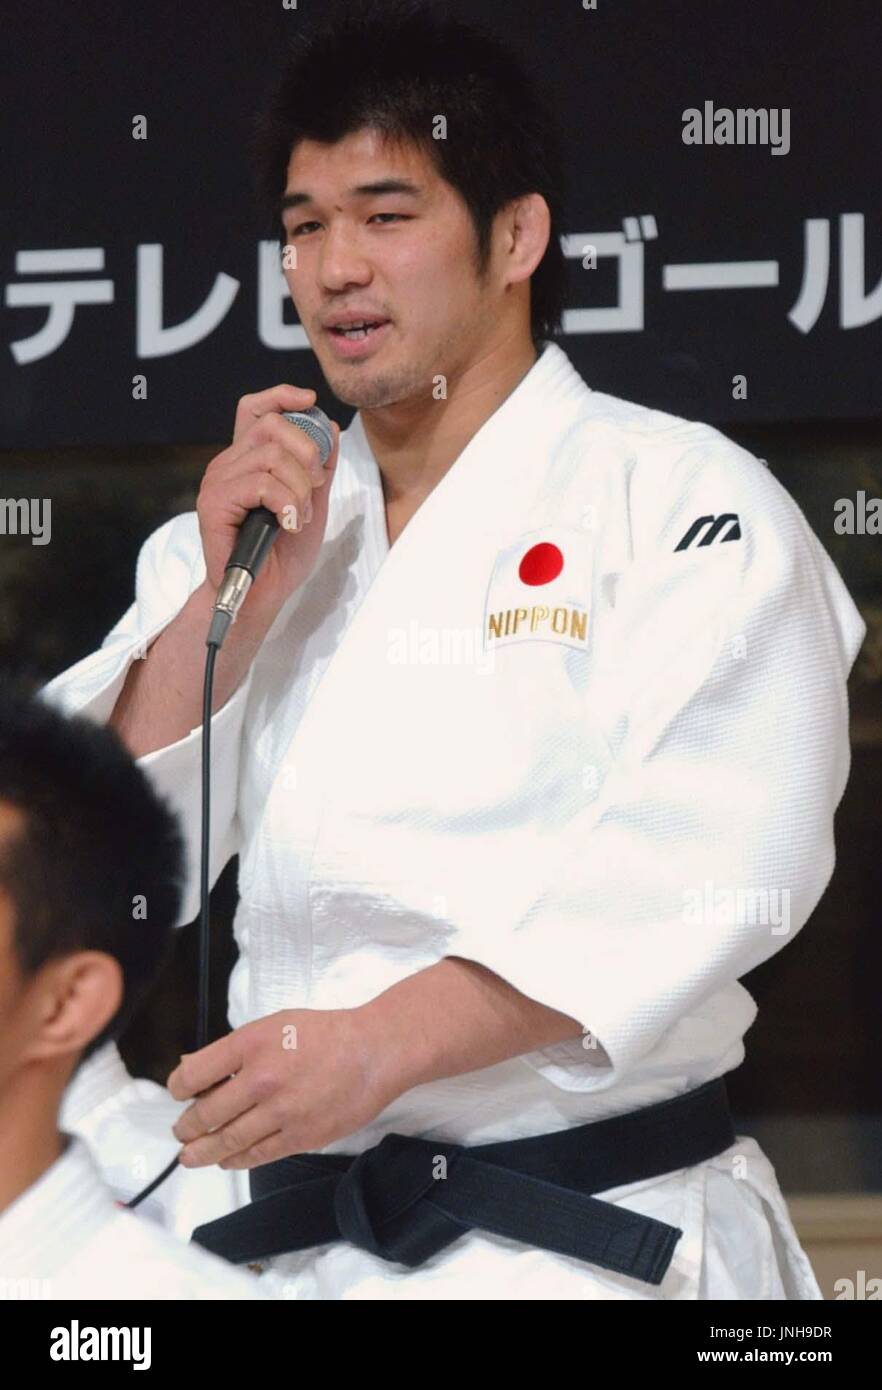 TOKYO, Japan - Japan's ace judoka Kosei Inoue speaks about his competition at the world judo championships in Osaka in September at a news conference at a Tokyo hotel on May 1. Inoue won the 100-kilogram gold medal at the Sydney Olympics. (Kyodo) Stock Photo